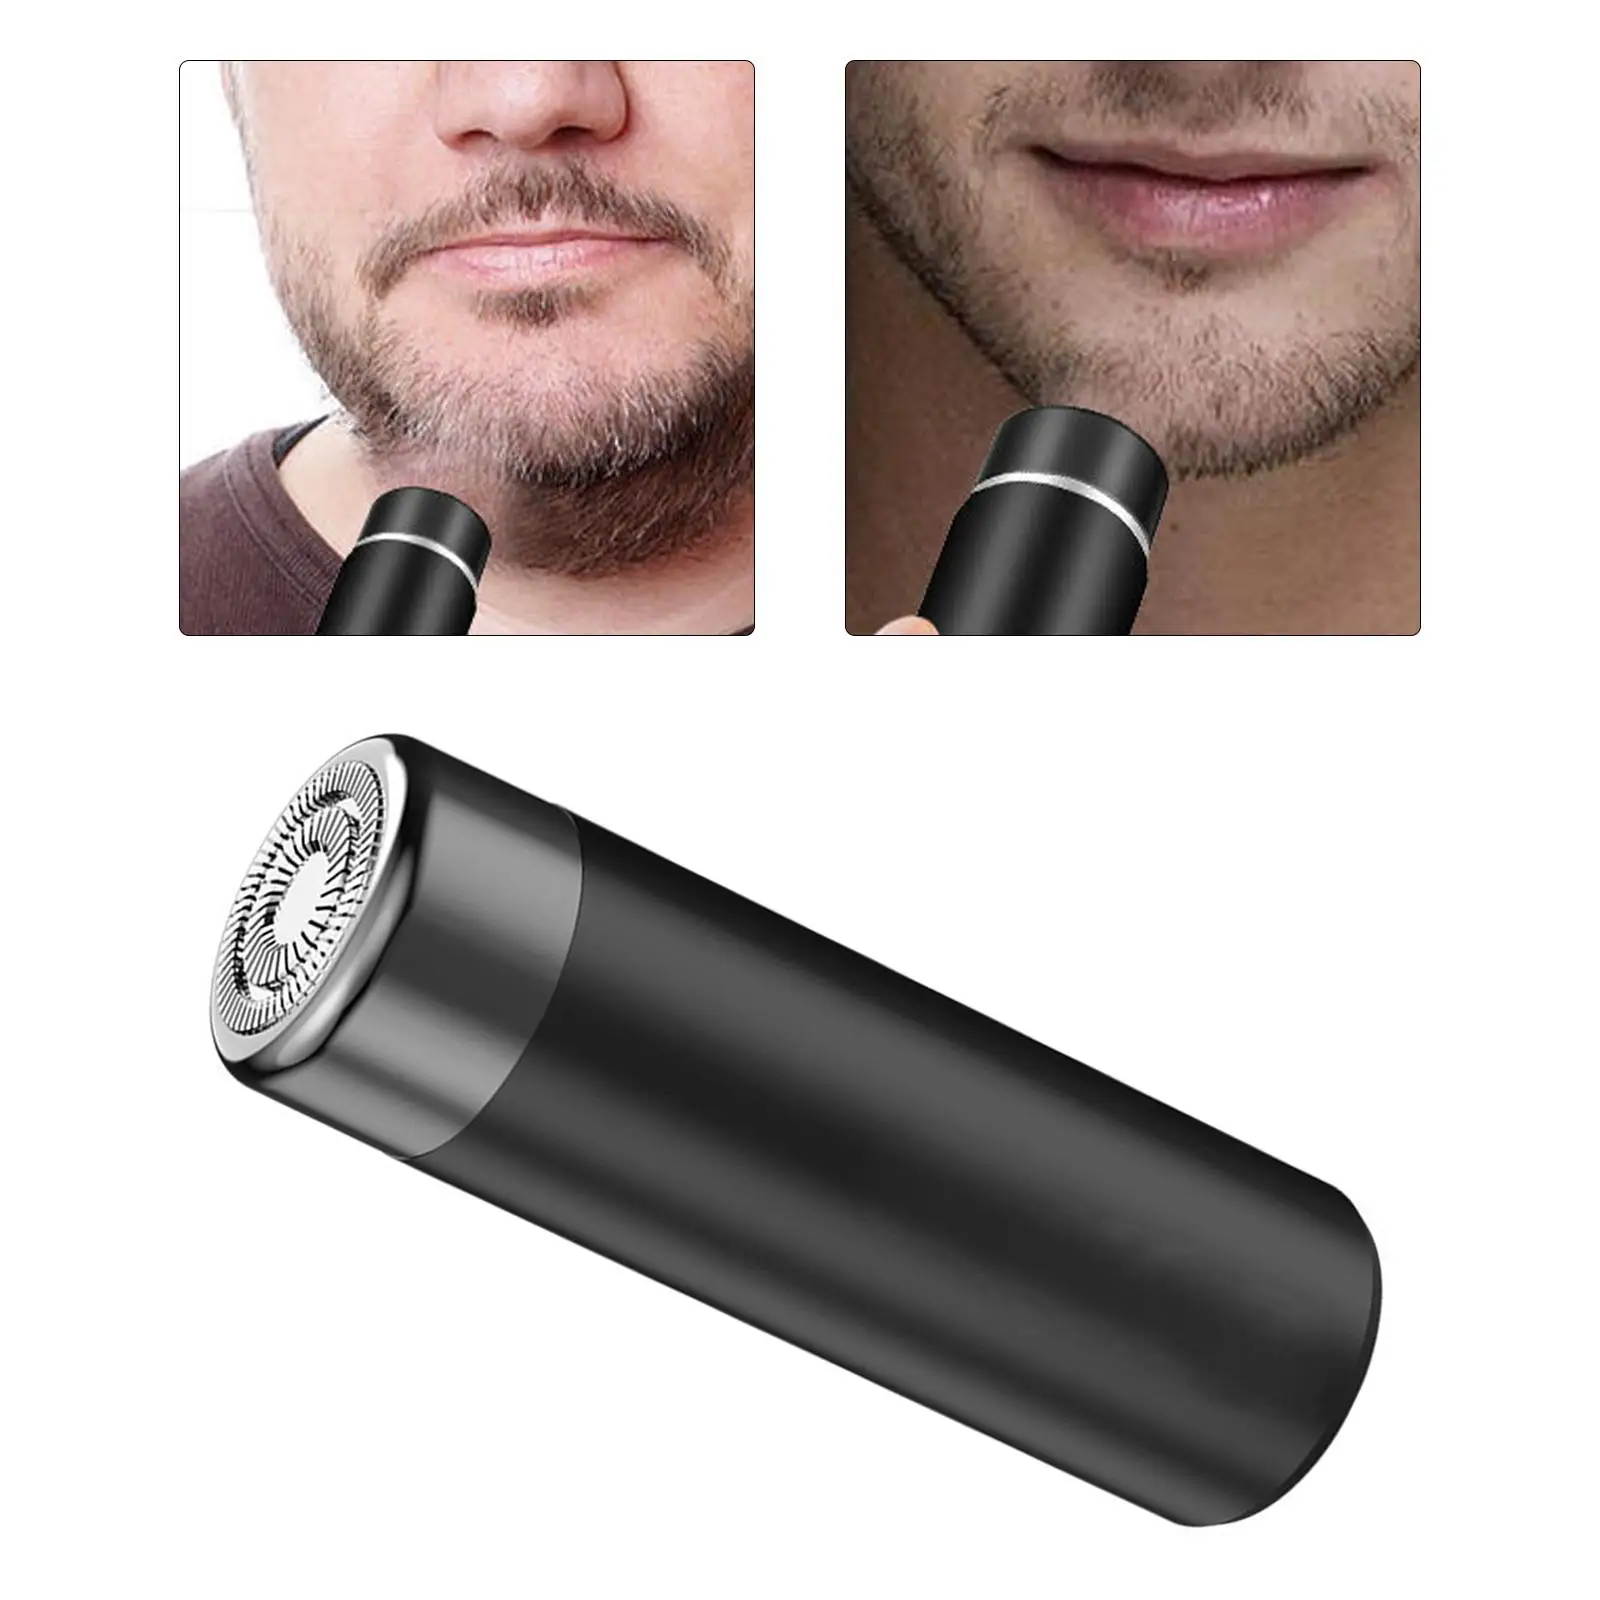 Mini Men`s Electric Shaving Cordless Compact USB Rechargeable Portable Wet Dry Use Facial Beard Trimmer for Travel Men